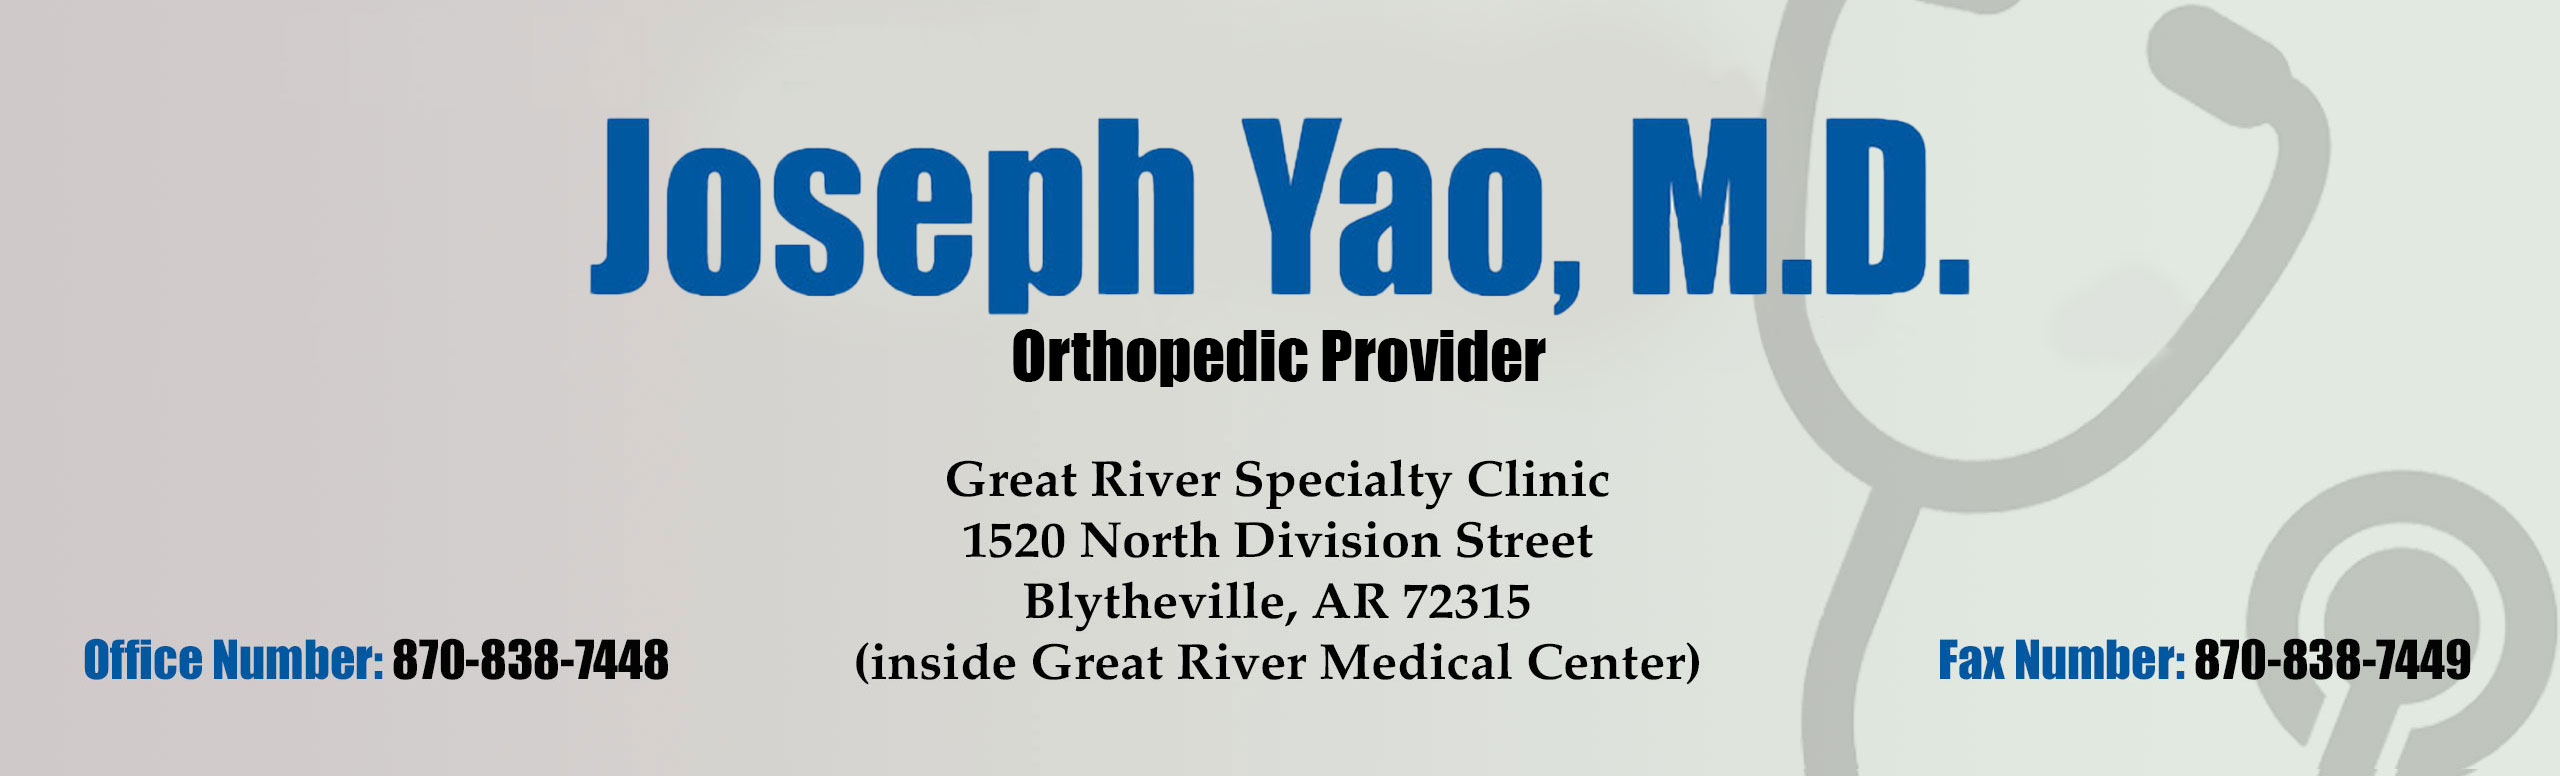 Joesph Yao, M.D. as the newest member of our medical staff at Mississippi County Hospital System.